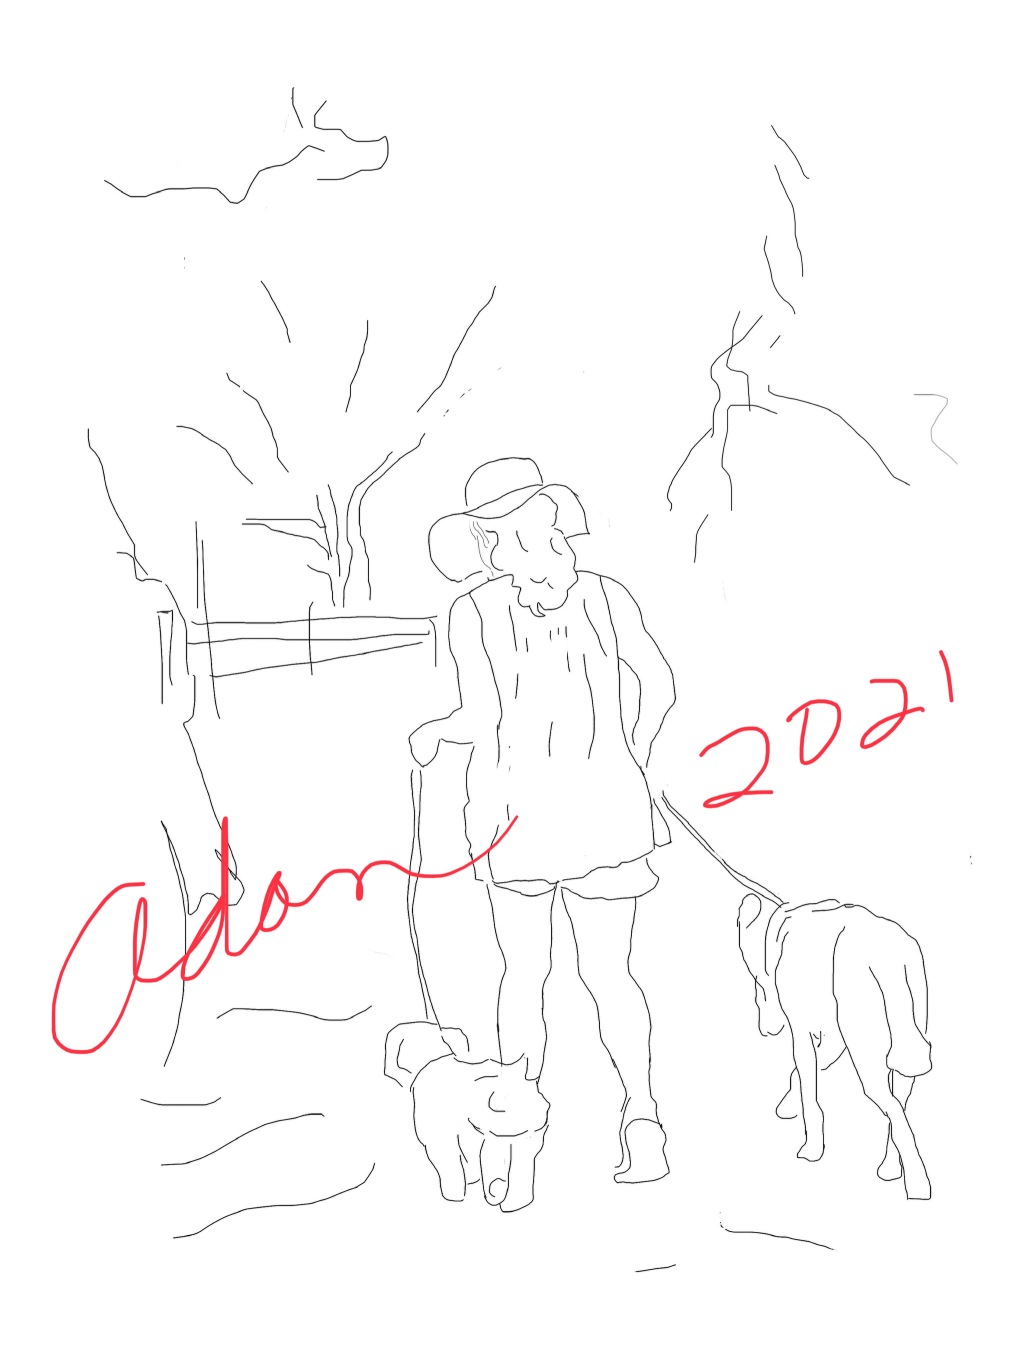 August 28, 2021 – (Still) Experimenting Developing Figure Sketches, Tentative Title: Woman Walking Dogs 1